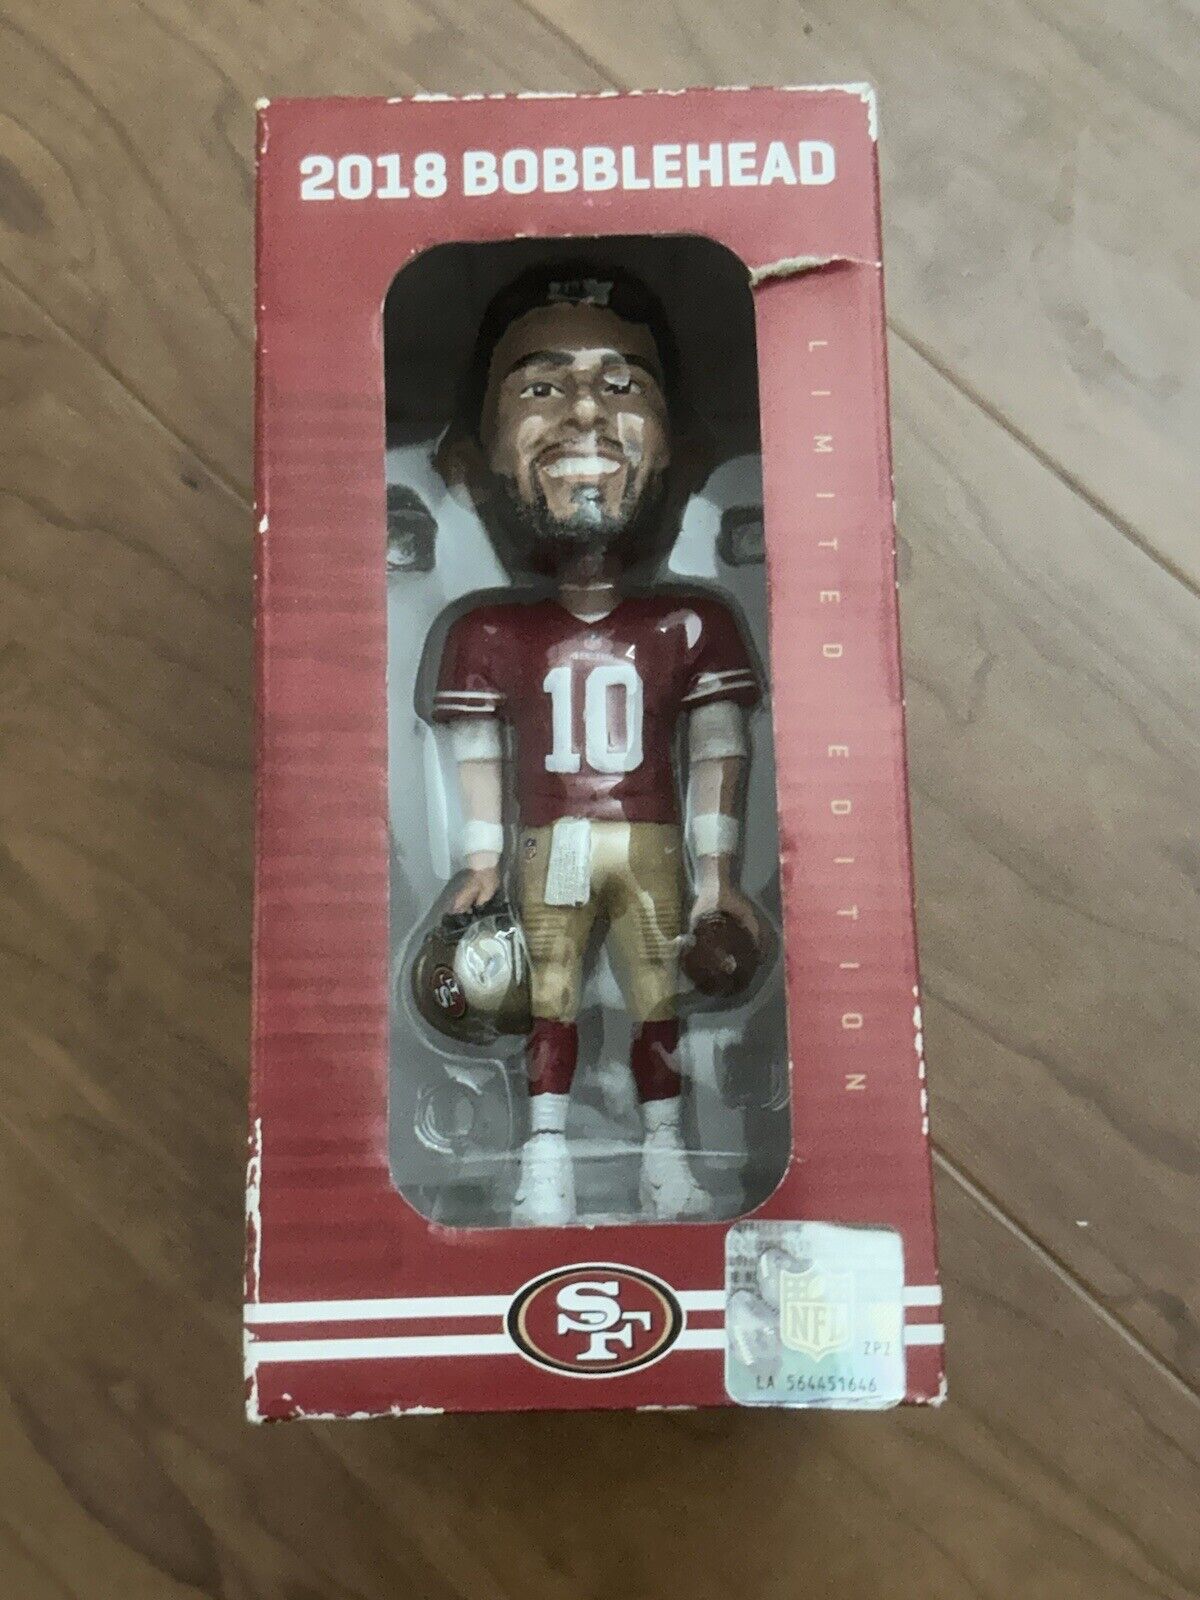 Jimmy Garoppolo 2018 Bobblehead San Francisco 49ers Limited Edition Stat Page